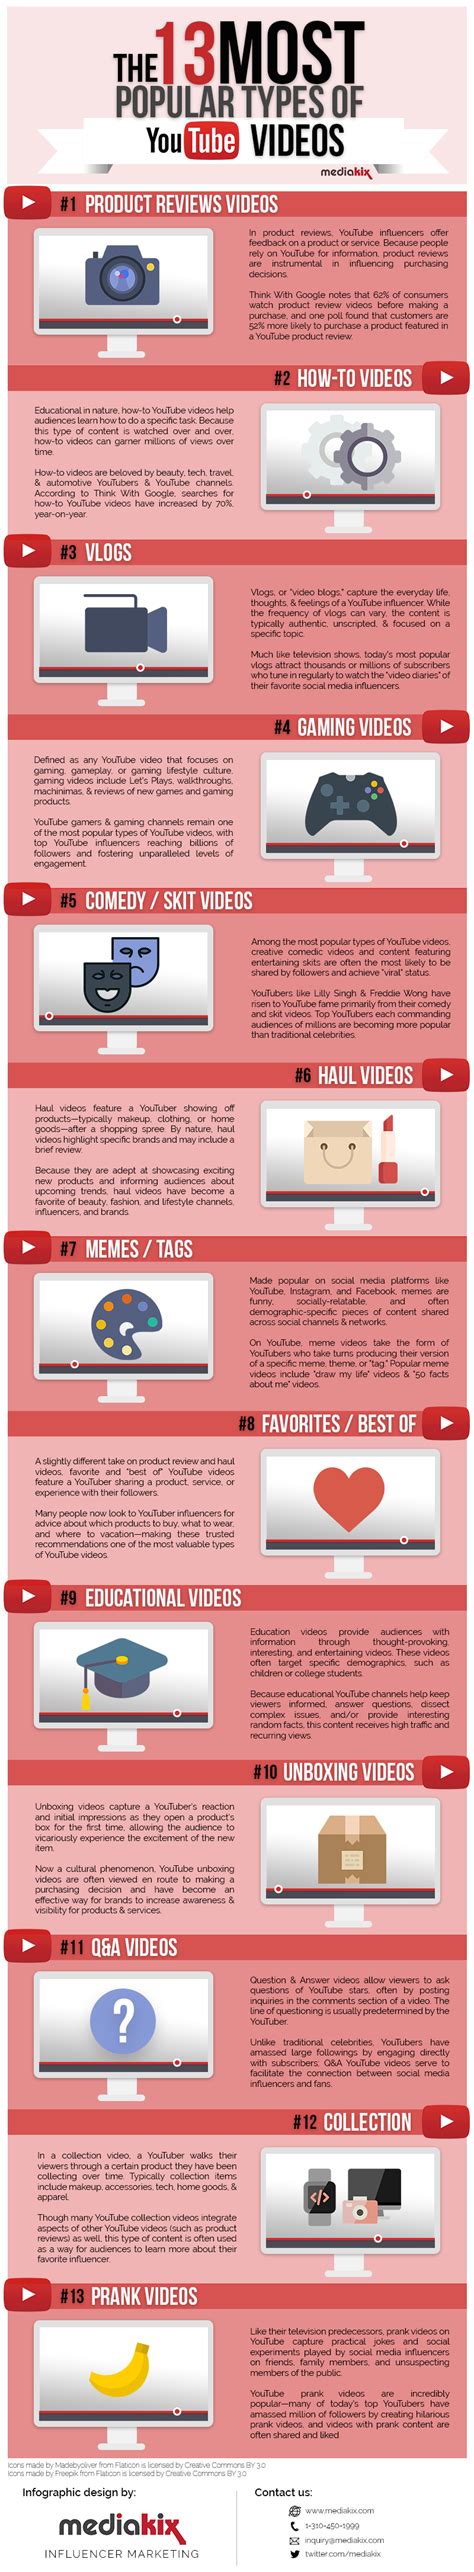 The Most Popular Types Of Videos On Youtube Infographic